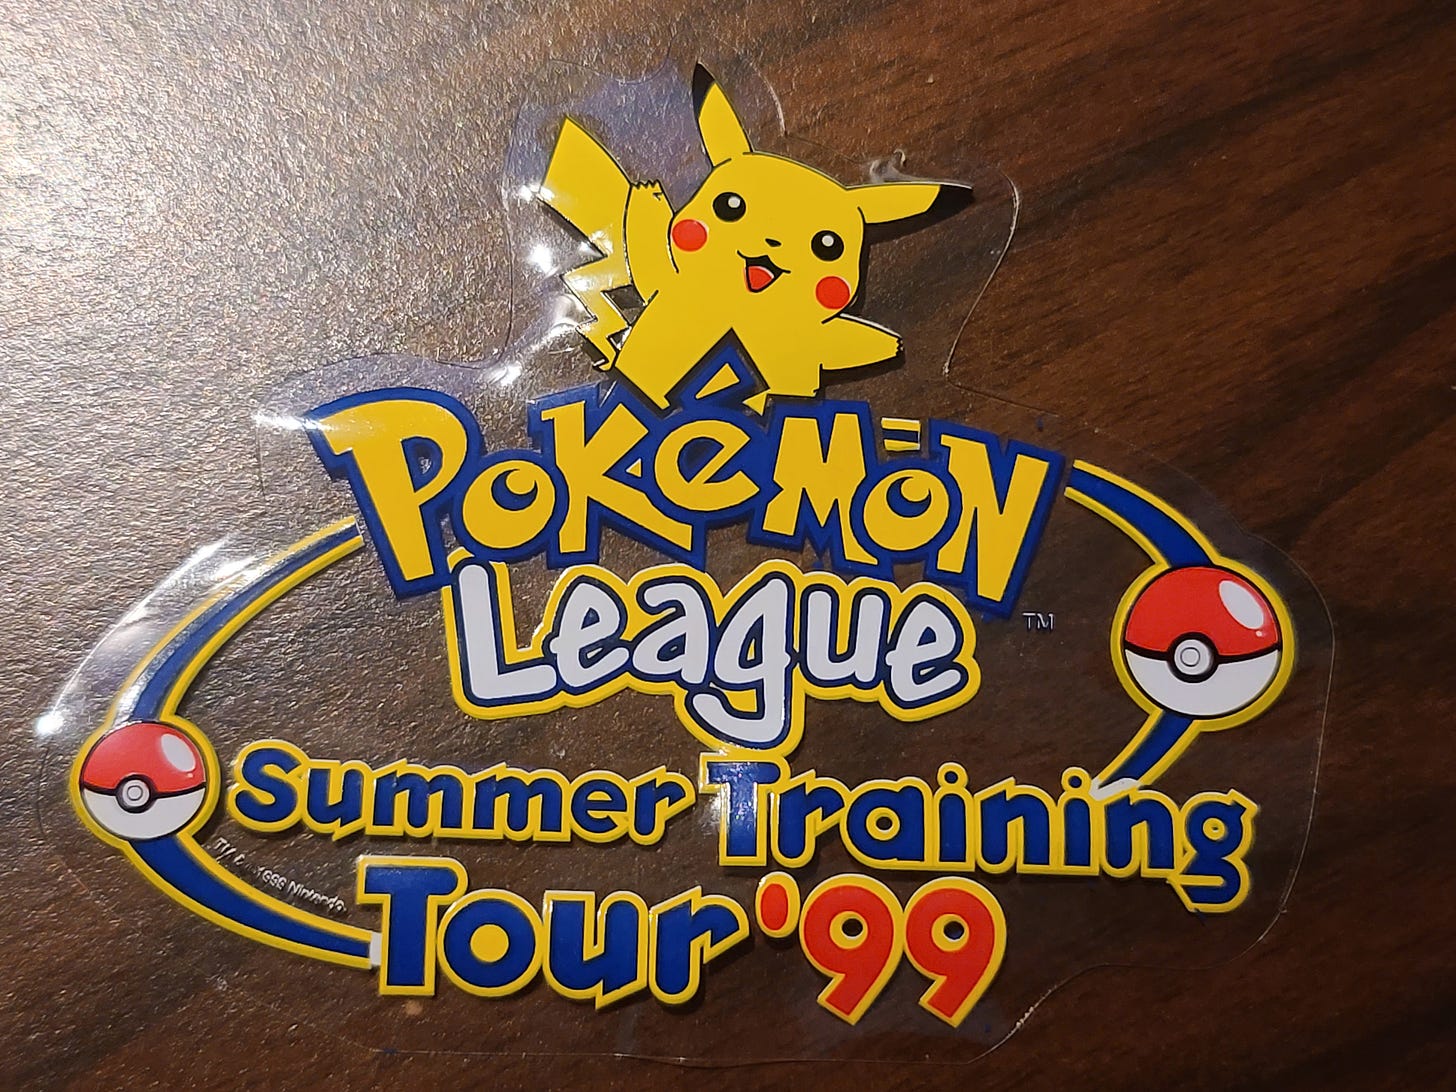 A Photograph of Jim's window sticker, with the logo from the Pokémon League Summer Training Tour 1999